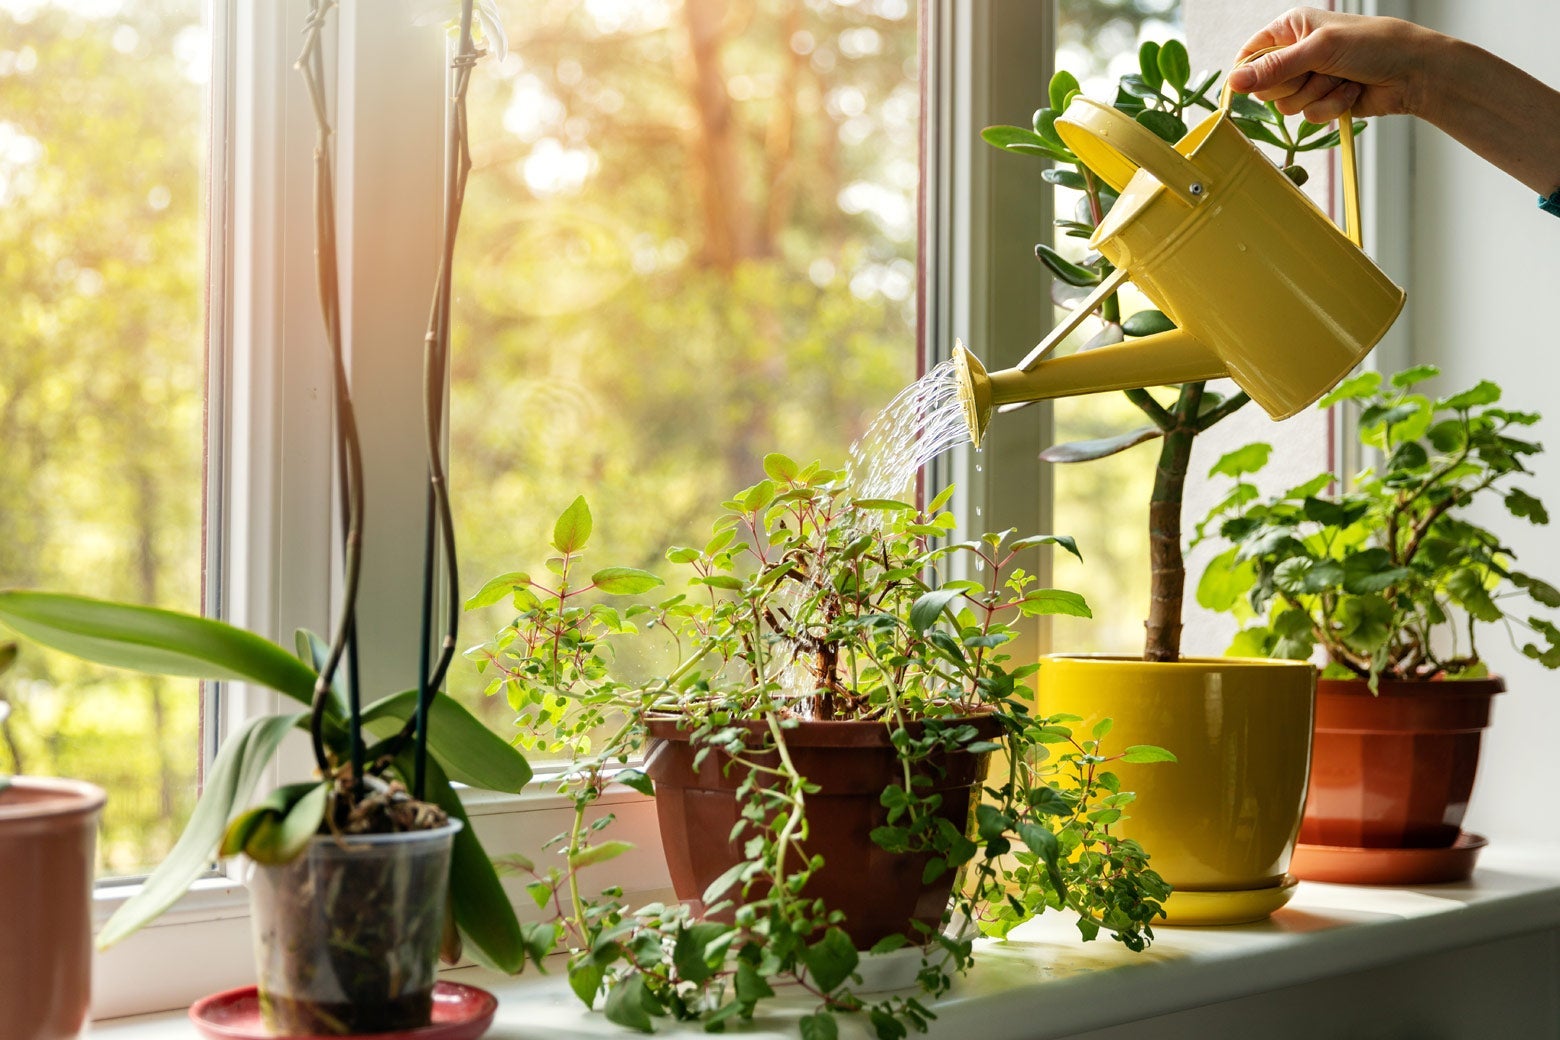 A woman's hand is seen watering house plants on a windowsill. 